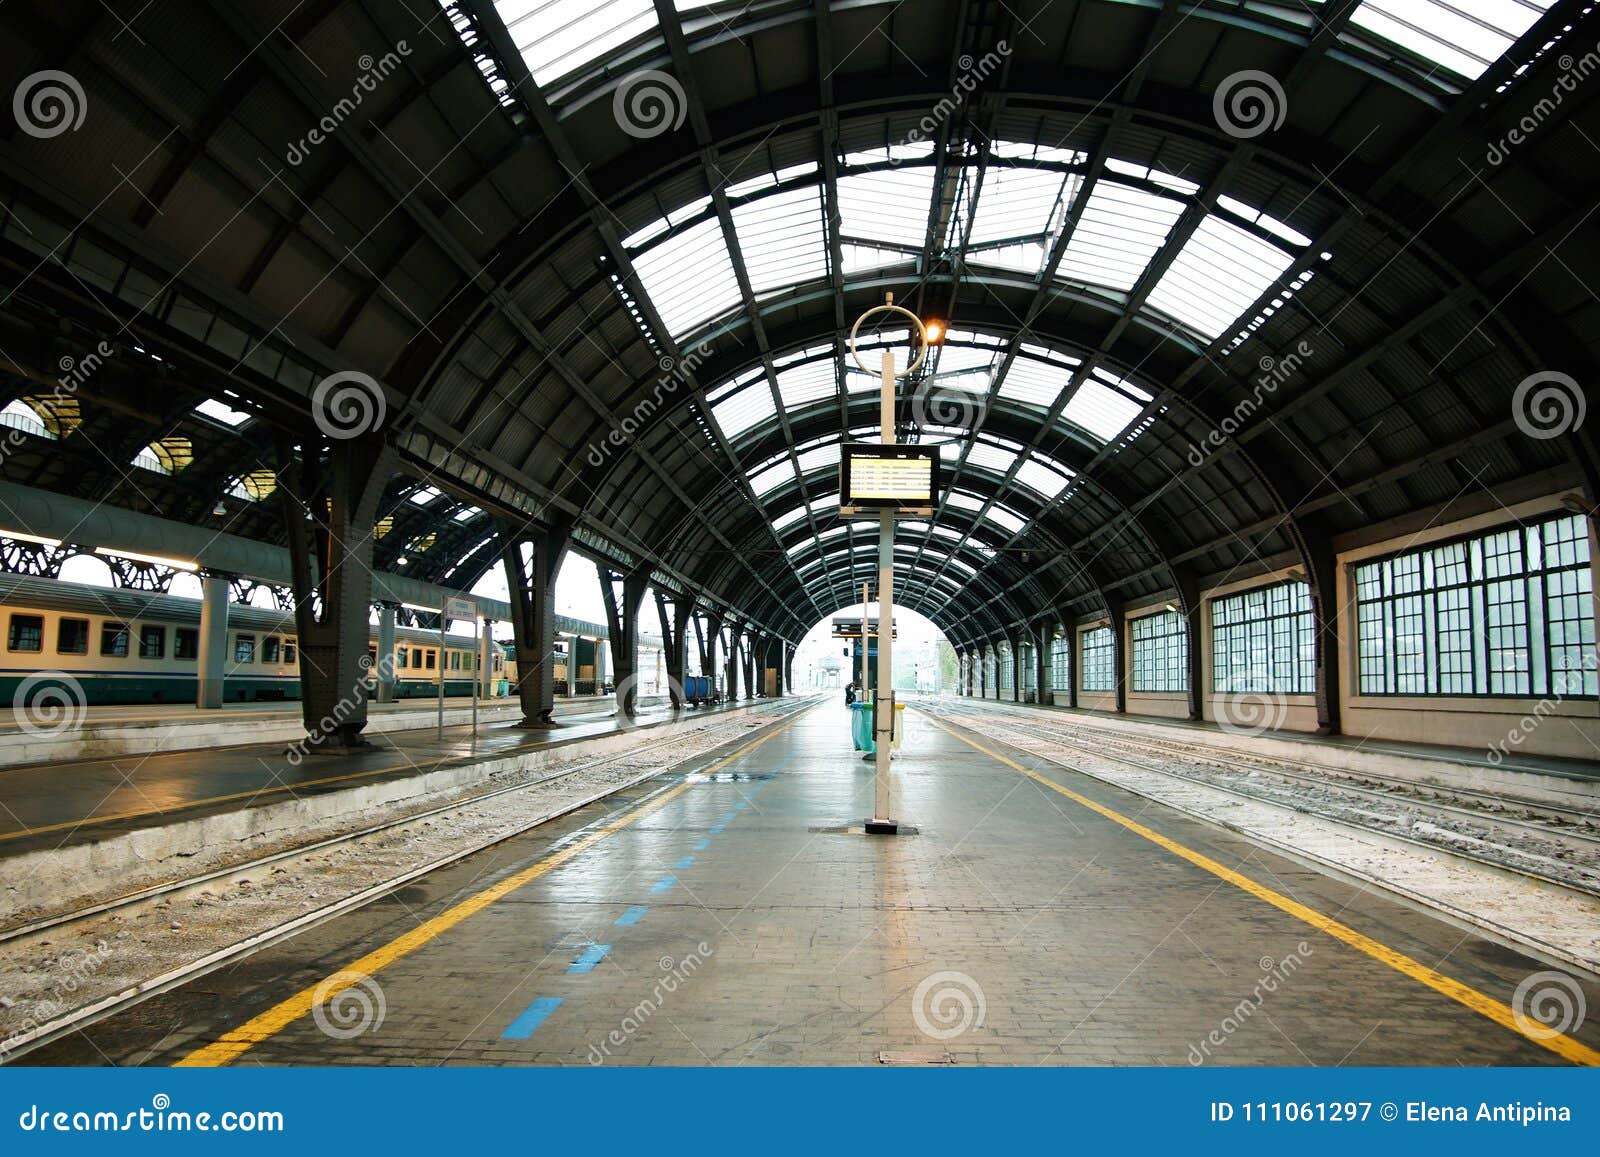 central railway station of milan. a part of a platform of station milano centrale